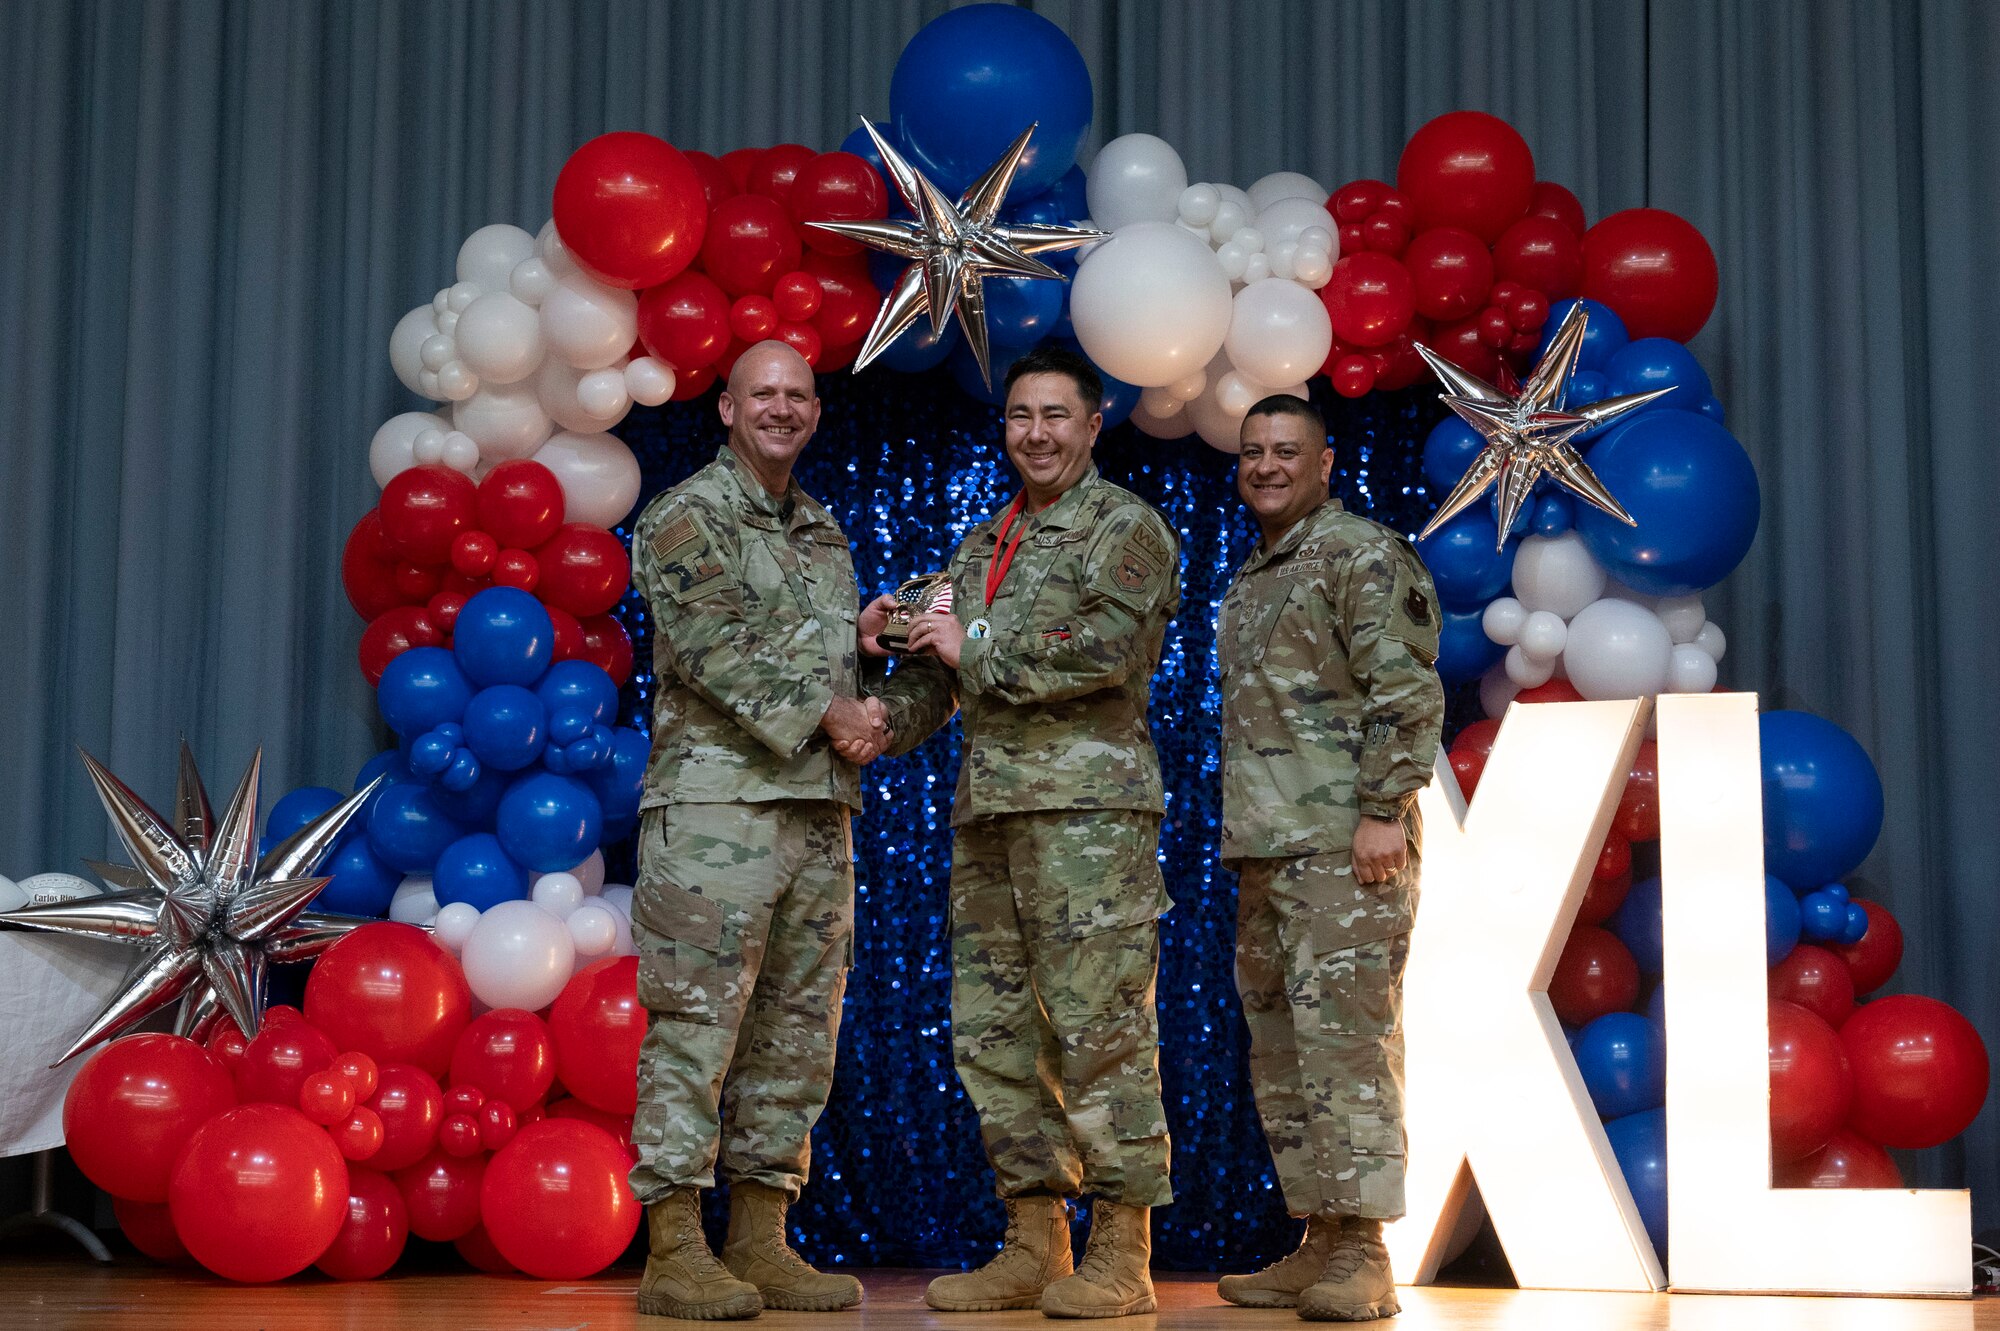 U.S. Air Force Col. Kevin Davidson, 47th Flying Training Wing (FTW) commander, and Chief Master Sgt. Lester Largaespada, 47th FTW command chief, present Master Sgt. Andrew Timms, 47th Operations Group, an award during the 2023 47th FTW Annual Awards Ceremony at Laughlin Air Force Base, Texas, Feb. 2, 2024. The annual awards recognized the top performers throughout the 47th Flying Training Wing during fiscal year 2023. (U.S. Air Force photo by Senior Airman Kailee Reynolds)